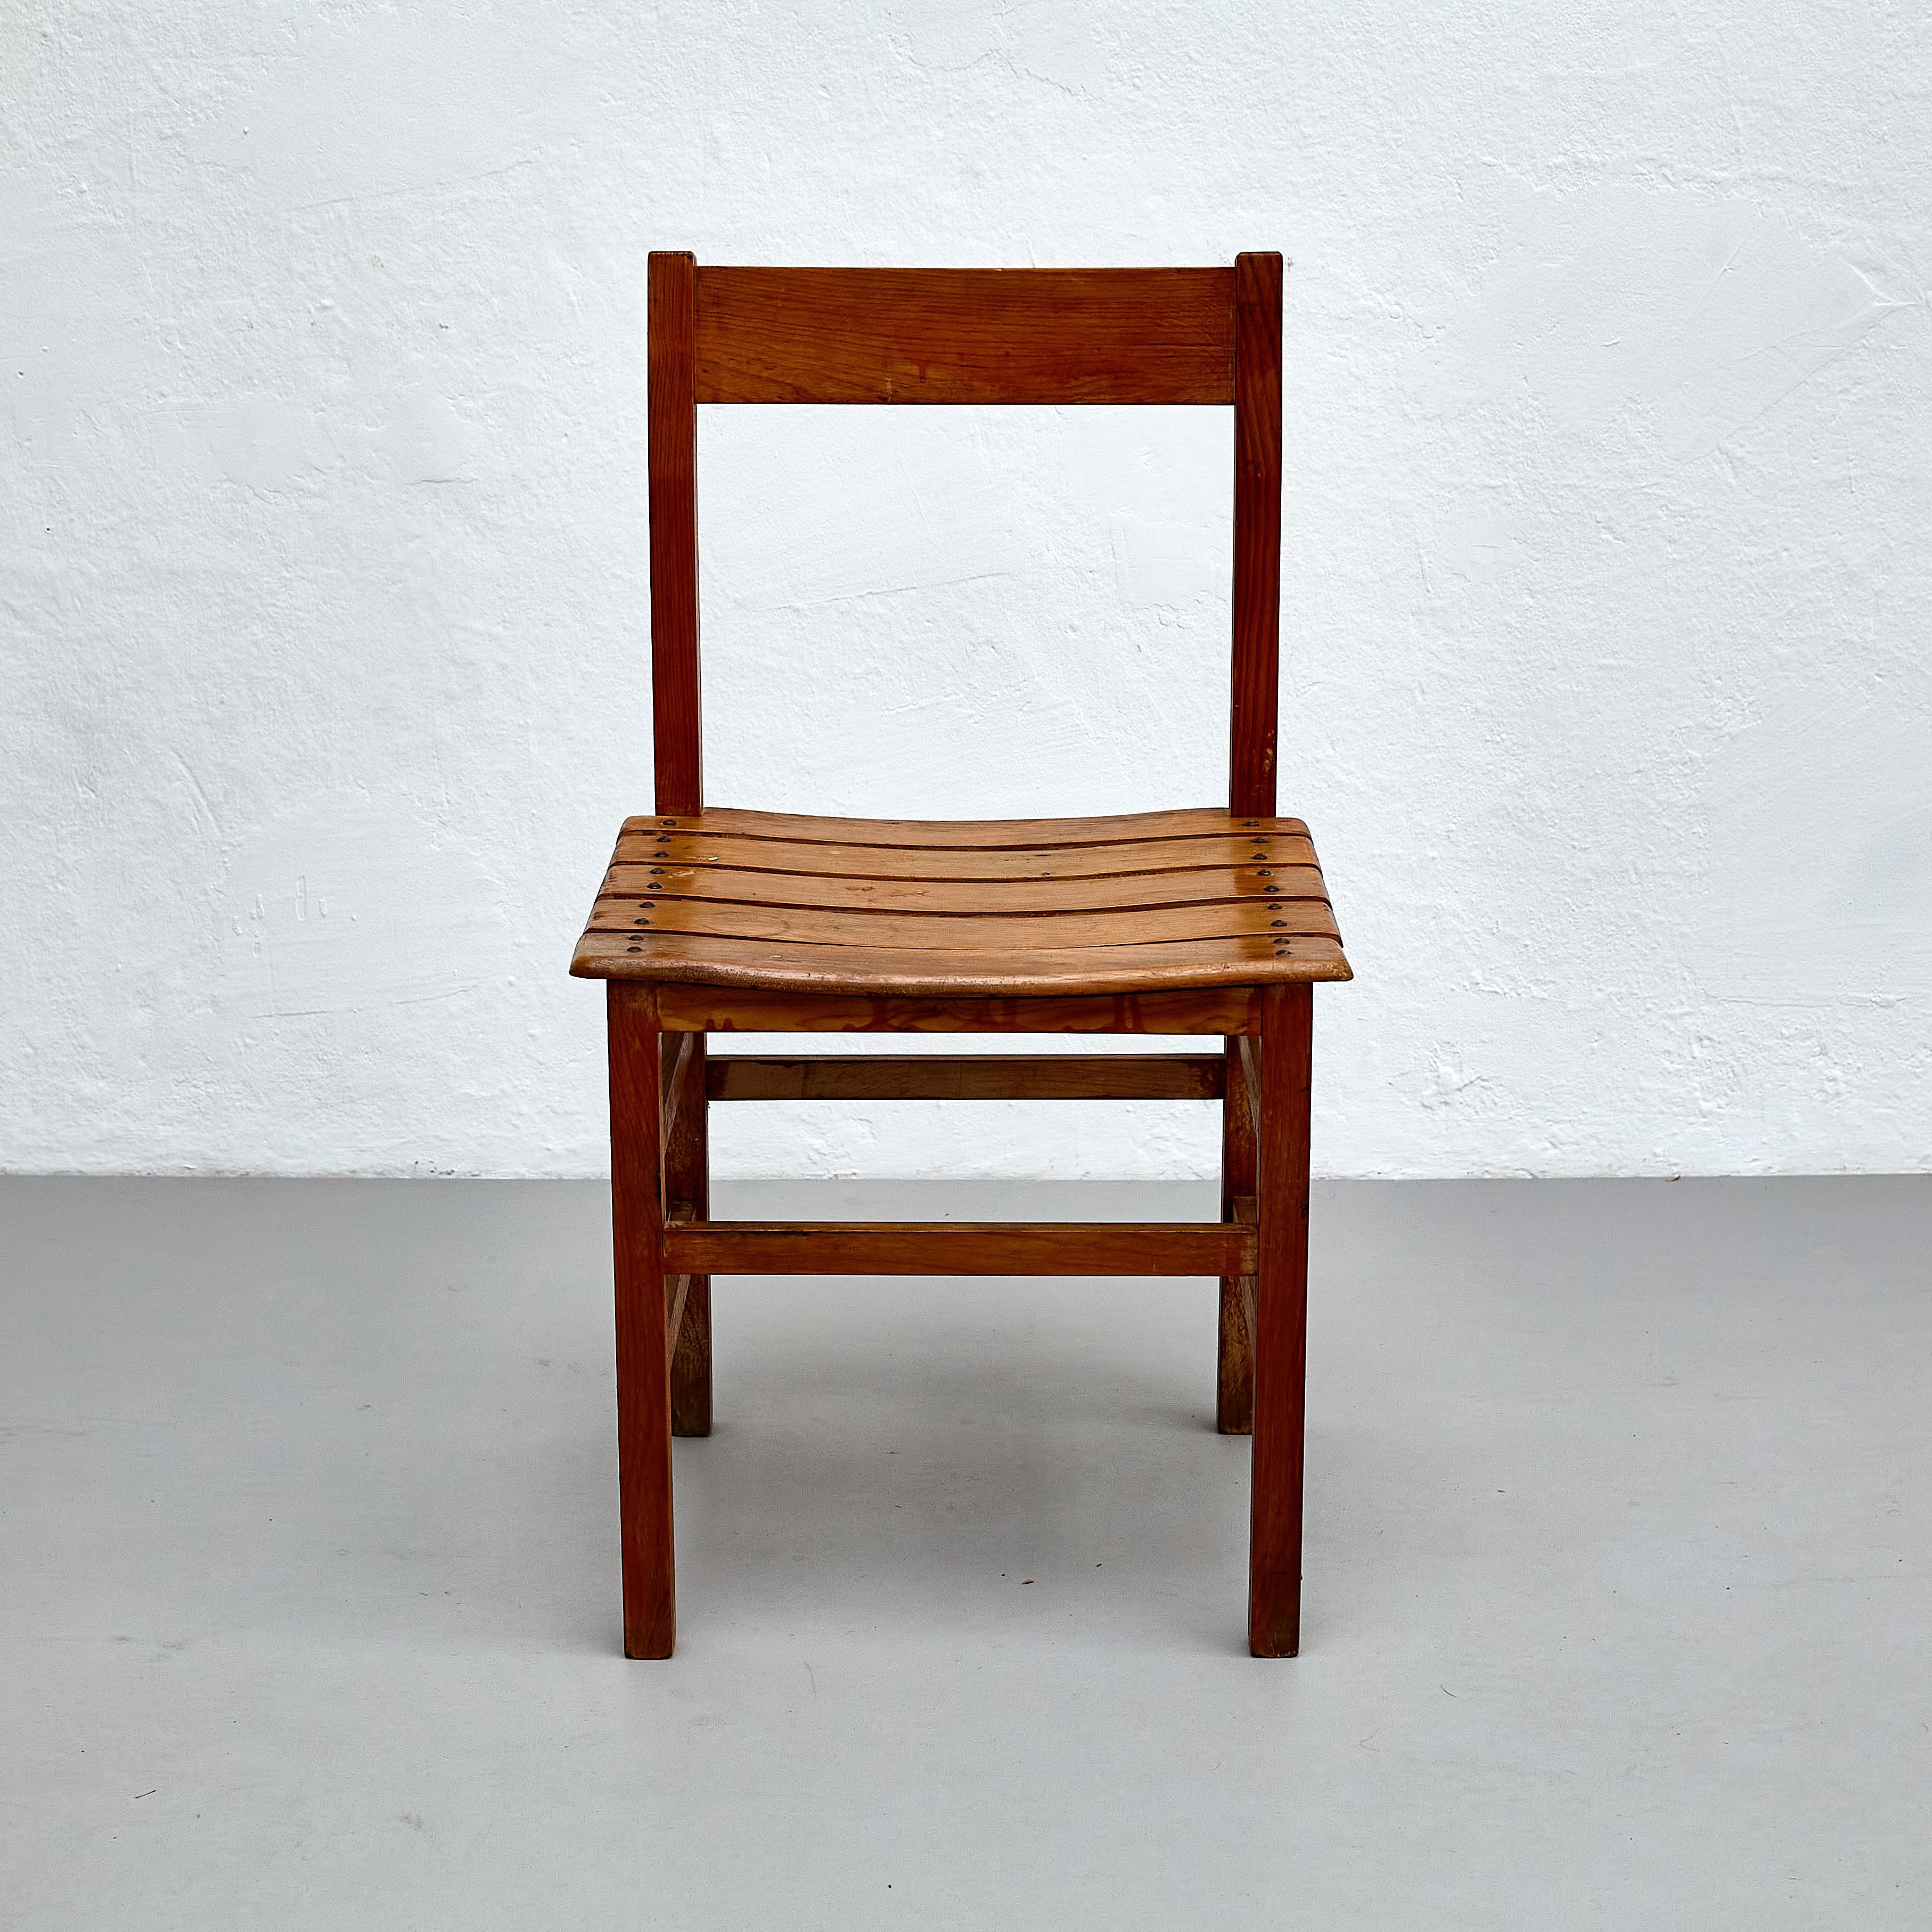 Set of Four Mid-Century Modern Rationalist Wood Chairs, Rustic Charm, circa 1960 For Sale 8